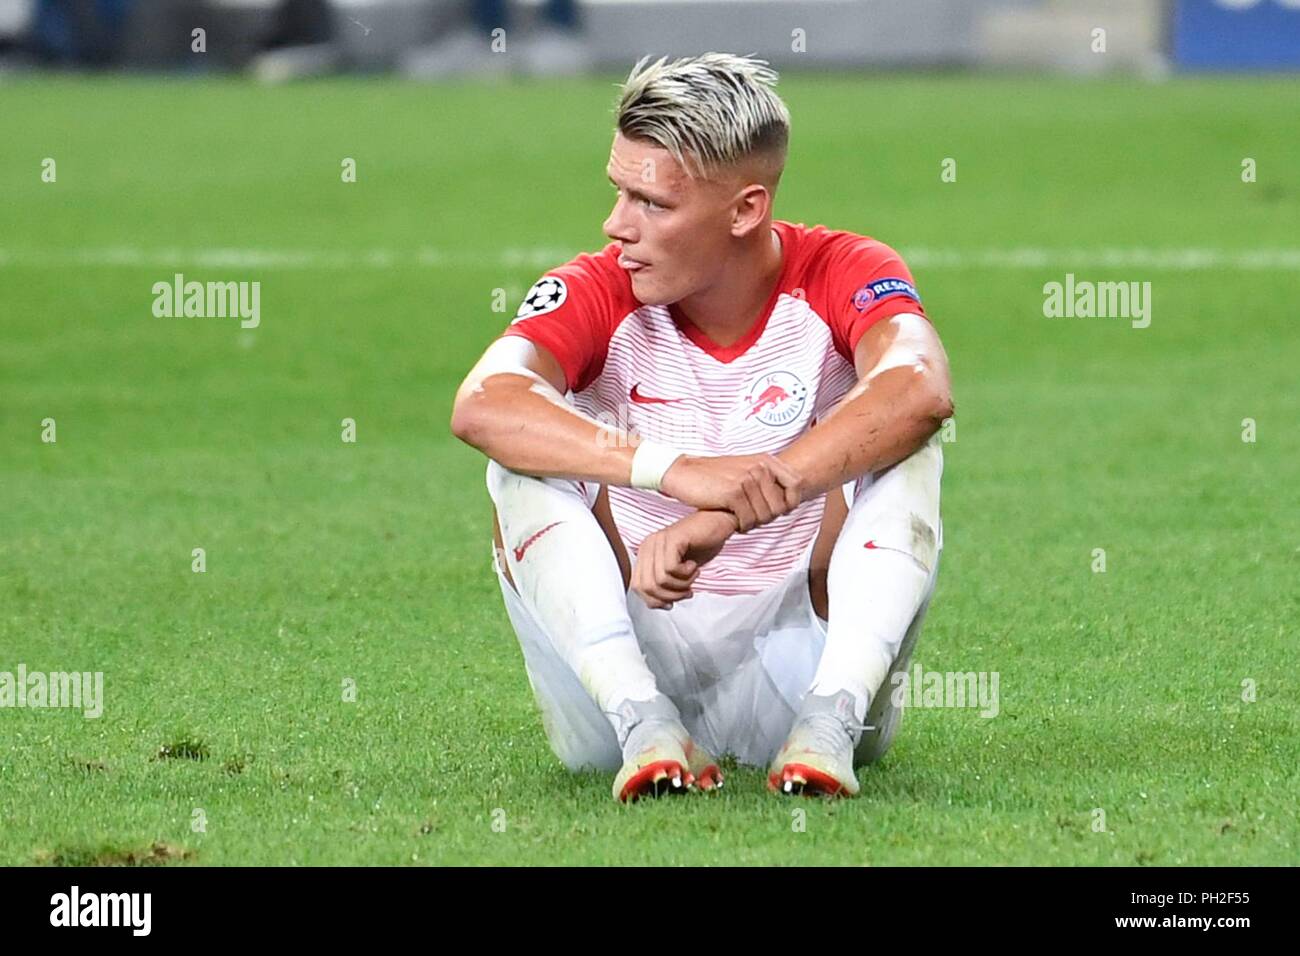 Salzburg, Austria August 29, 2018: CL - Quali - 18/19 - RB Salzburg Vs. Red Star Belgrade Hannes Wolf (FC Salzburg), sitting on ground, action/single image/cut out/dissatisfied/disappointed/disappointed/dejected/frustratedriert/| Stock Photo